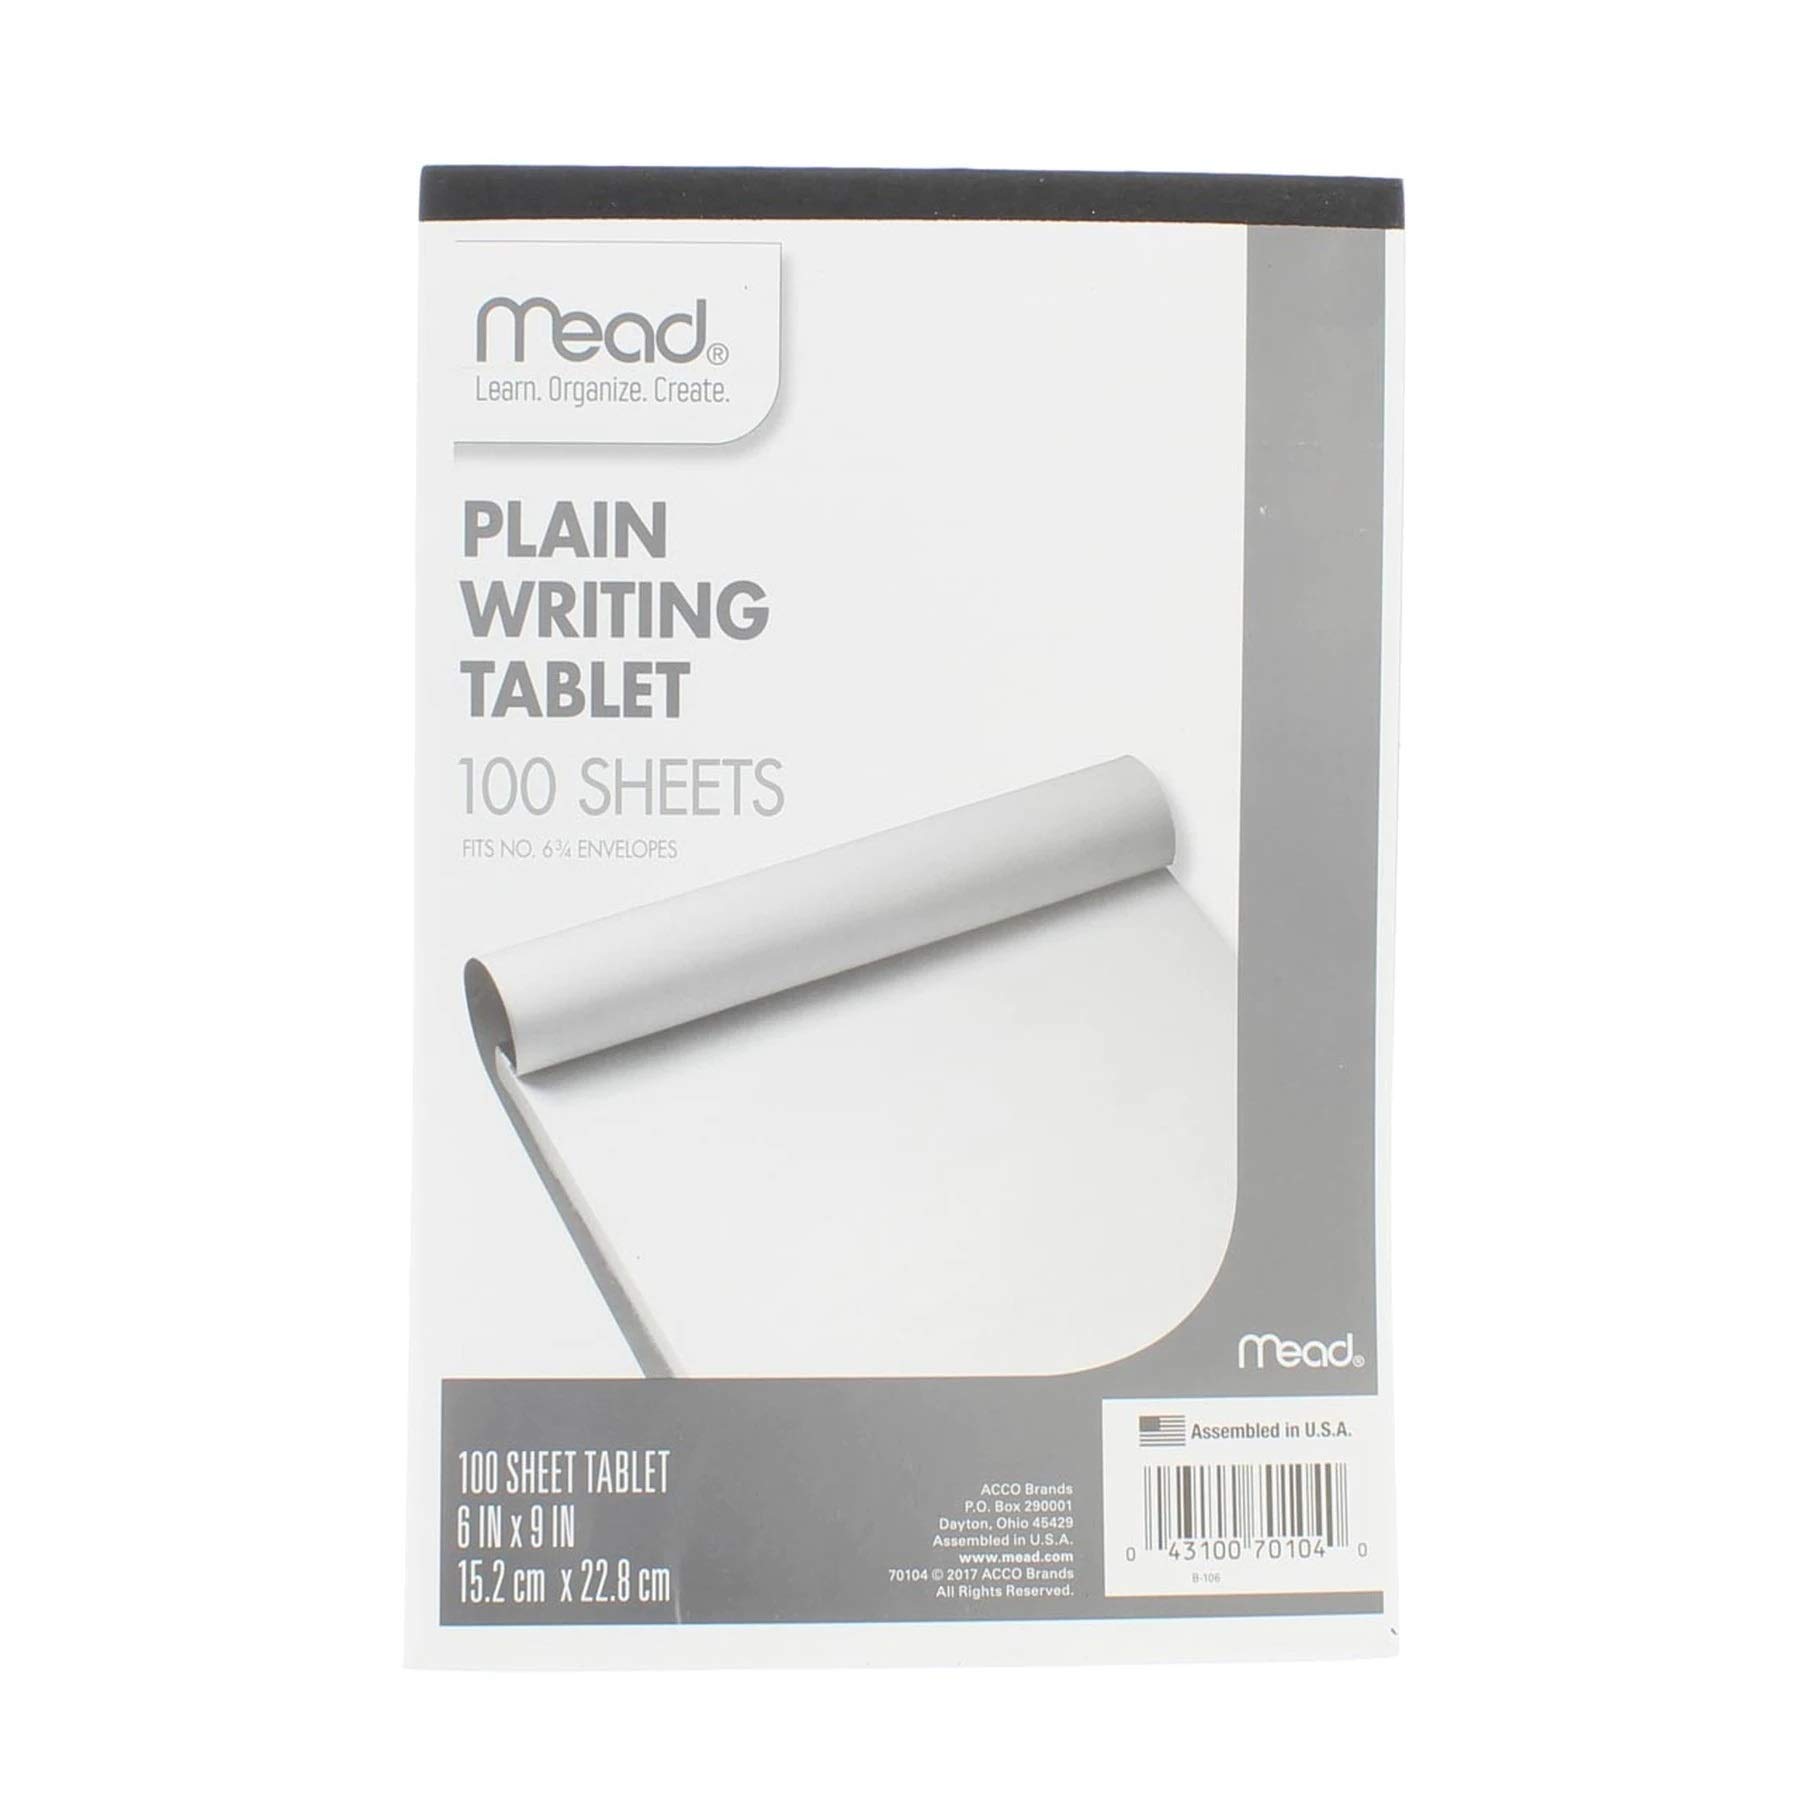 Mead Products - Writing Tablet, Top-bound, Plain, 15 lb, 6 in. x9 in, 100 Sh, White - Sold as 1 EA - Writing Tablet Contains 100 Sheets